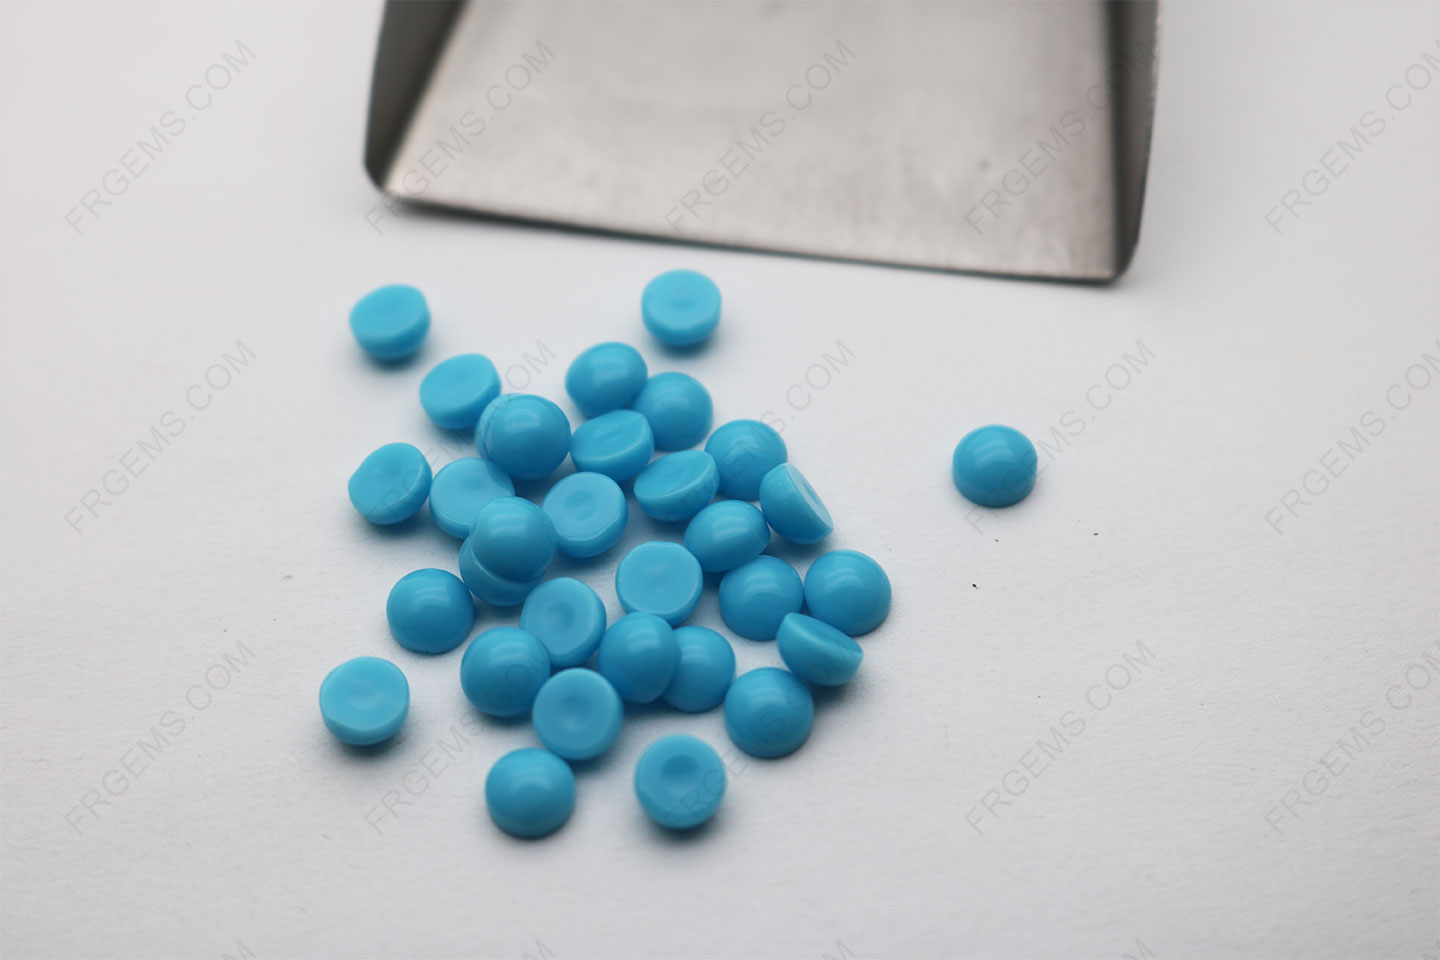 Glass Synthetic Turquoise Blue color Round shape cabochon 5mm Loose gemstones wholesale